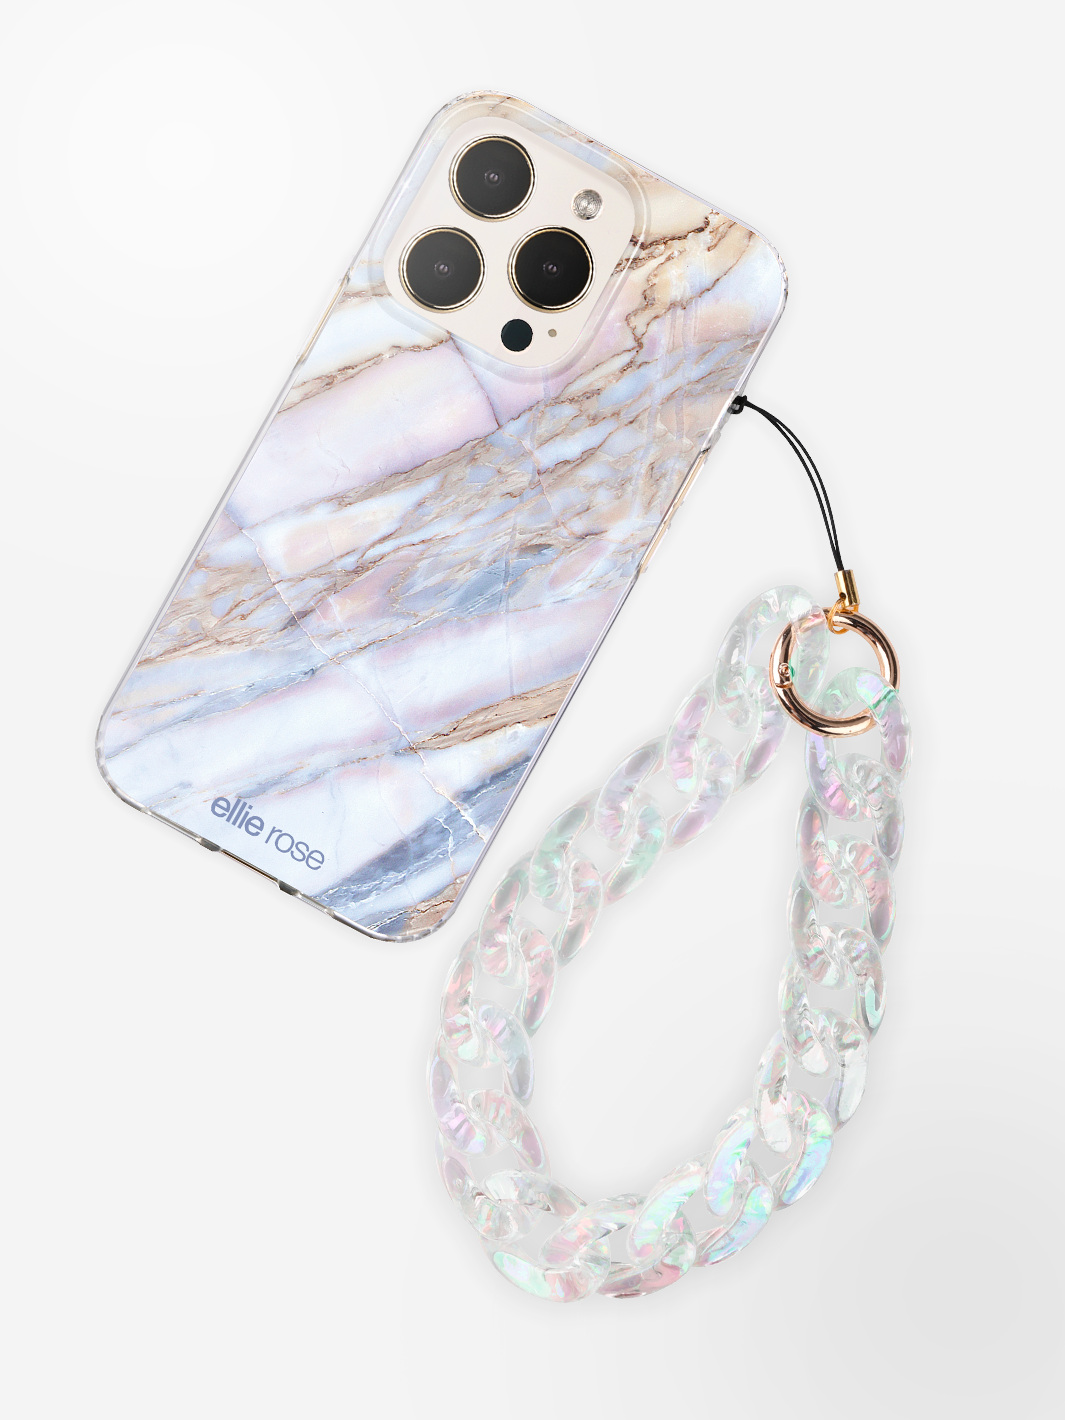 Clear Holographic Phone Charm